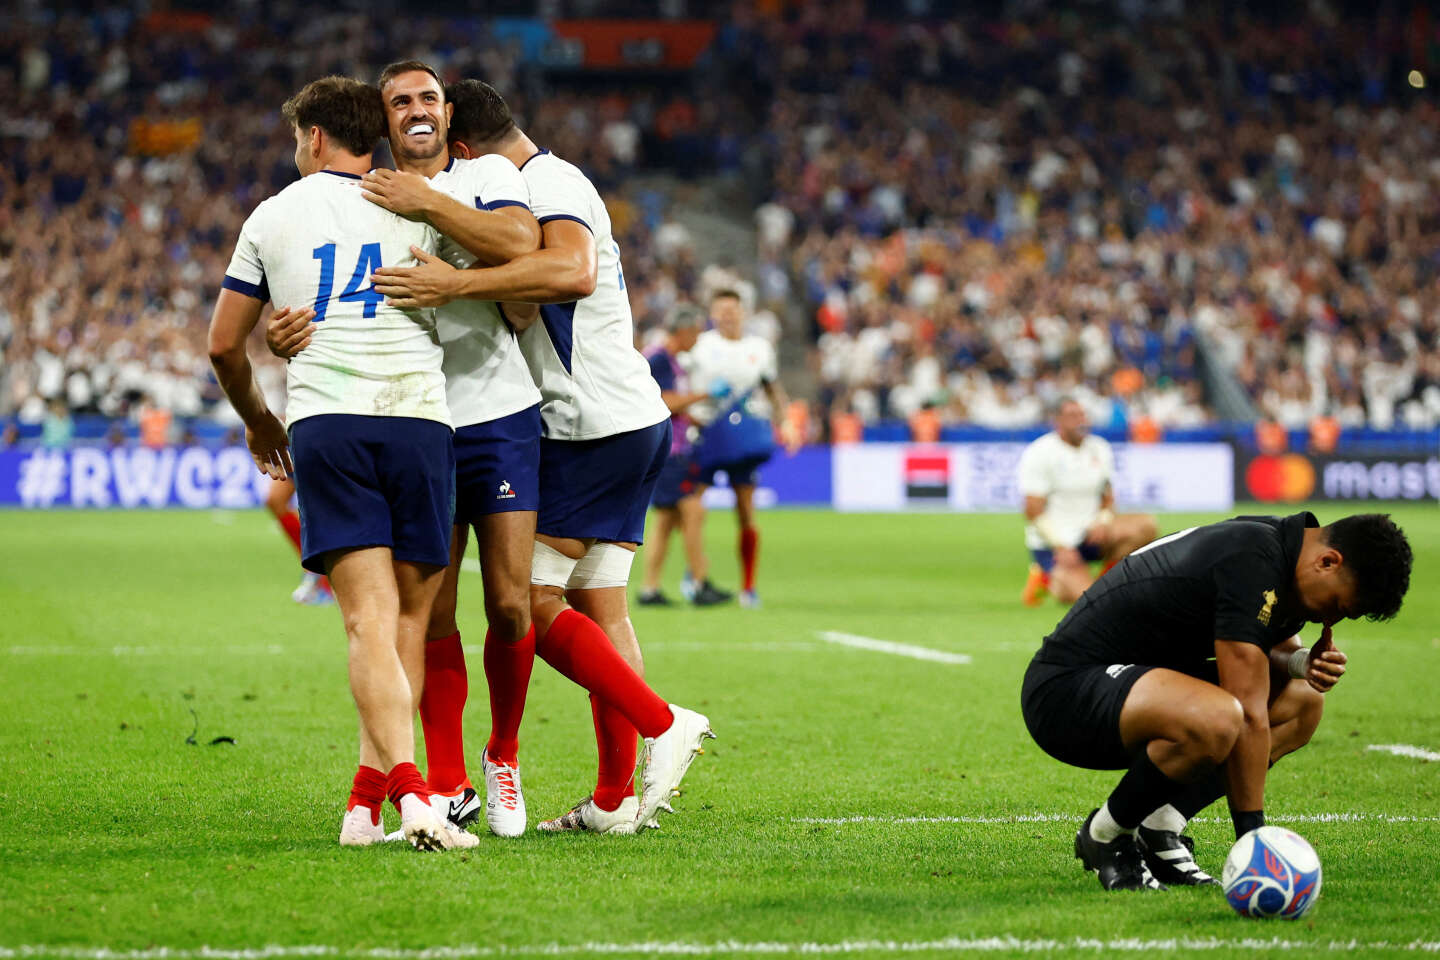 Successful entry of France’s XV in the opening World Cup